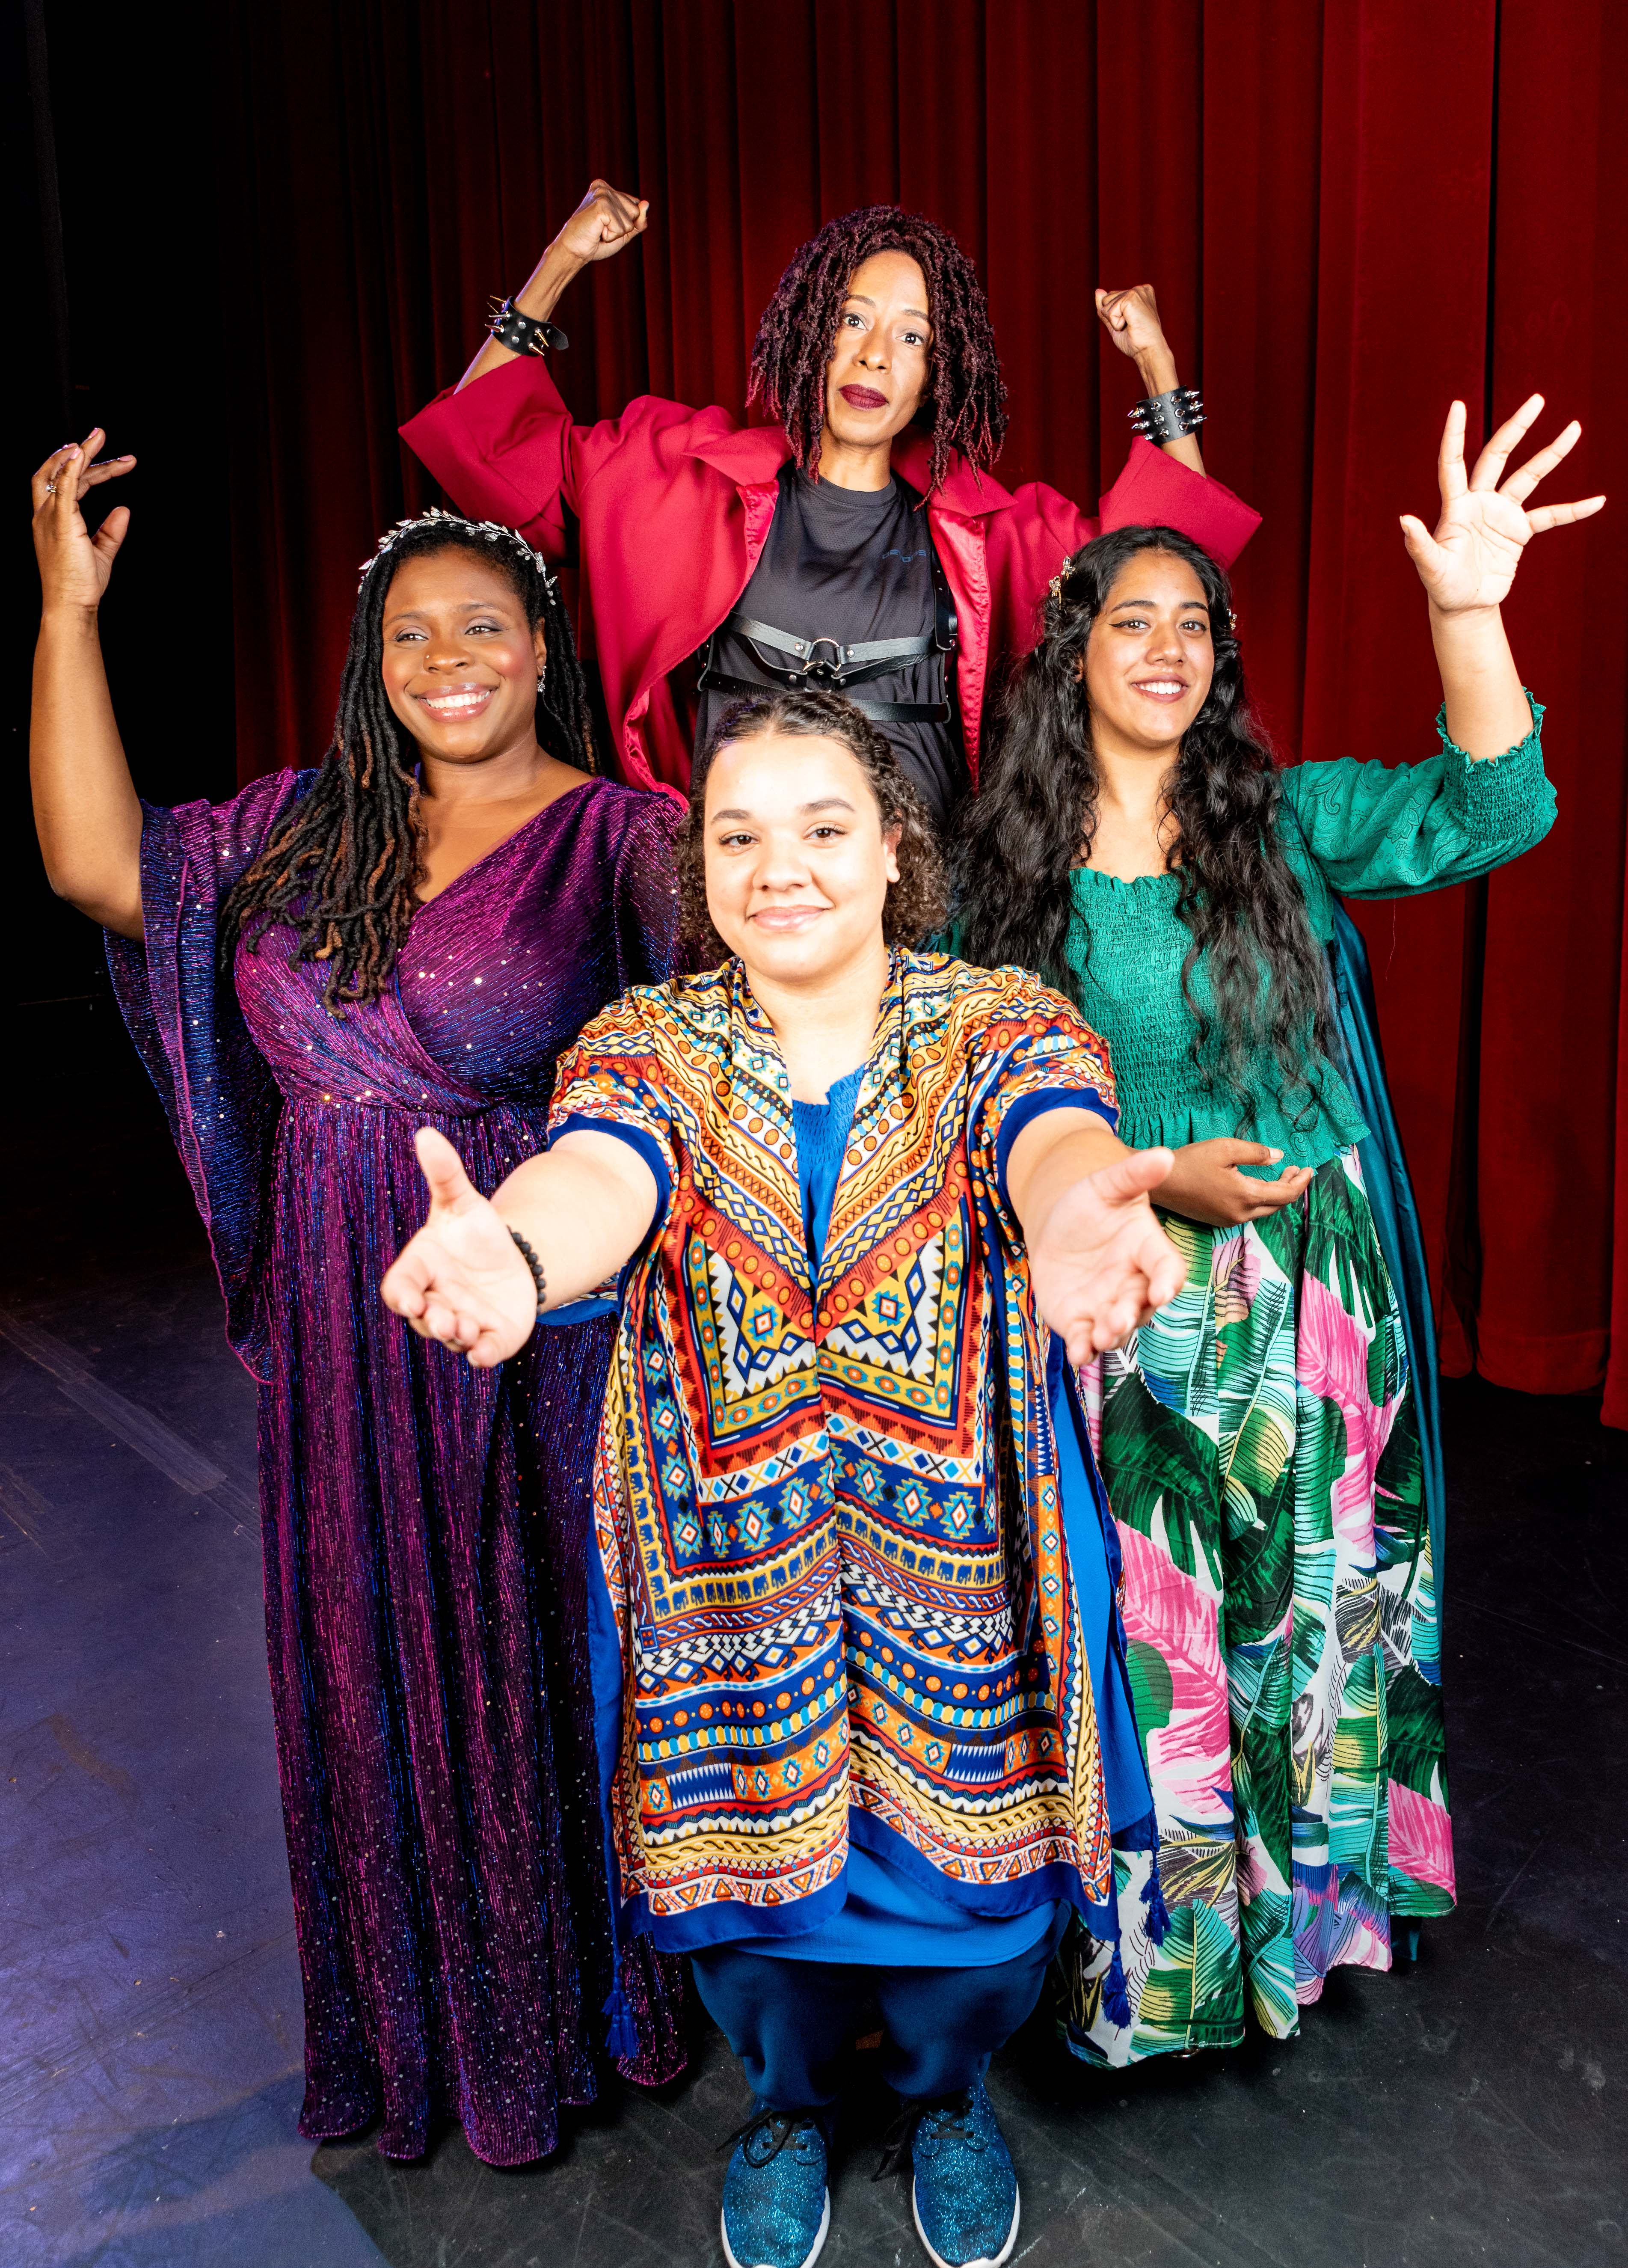 The Gods of Once On This Island:
Asaka (Randi Seepersad), Agwe (Anderson Gray), Erzulie (Alana Simone) and Papa Ge (Tai Alexander). Photo by THsquared Photography